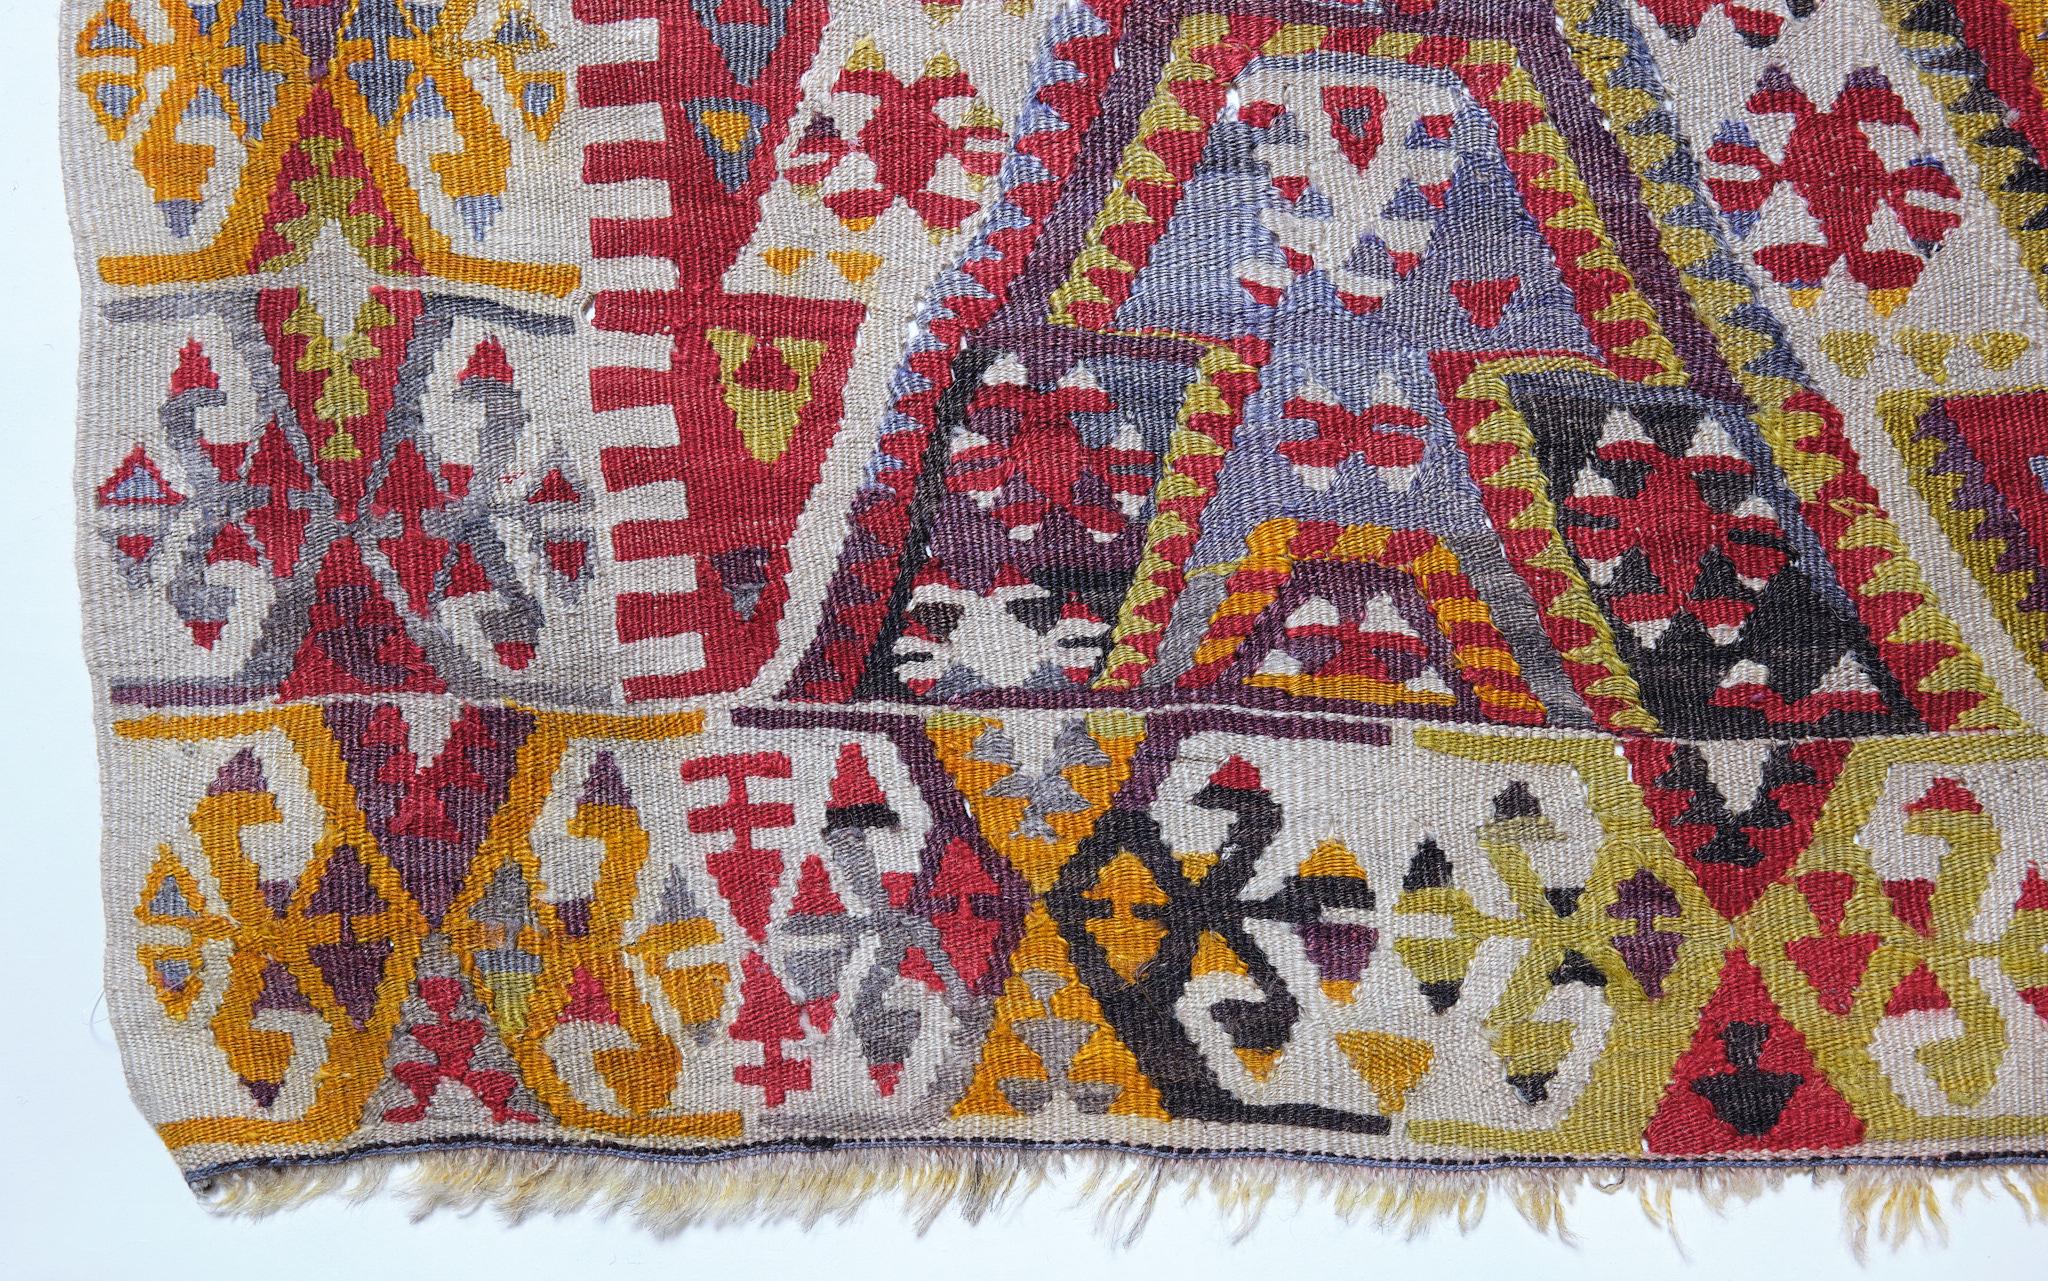 This is a South Eastern Anatolian old vintage Kilim from the Malatya region with a rare and beautiful color composition.

Malatya is Turkey's main kilim production area, and there are many variations. This is one of them, a runner-type kilim. The